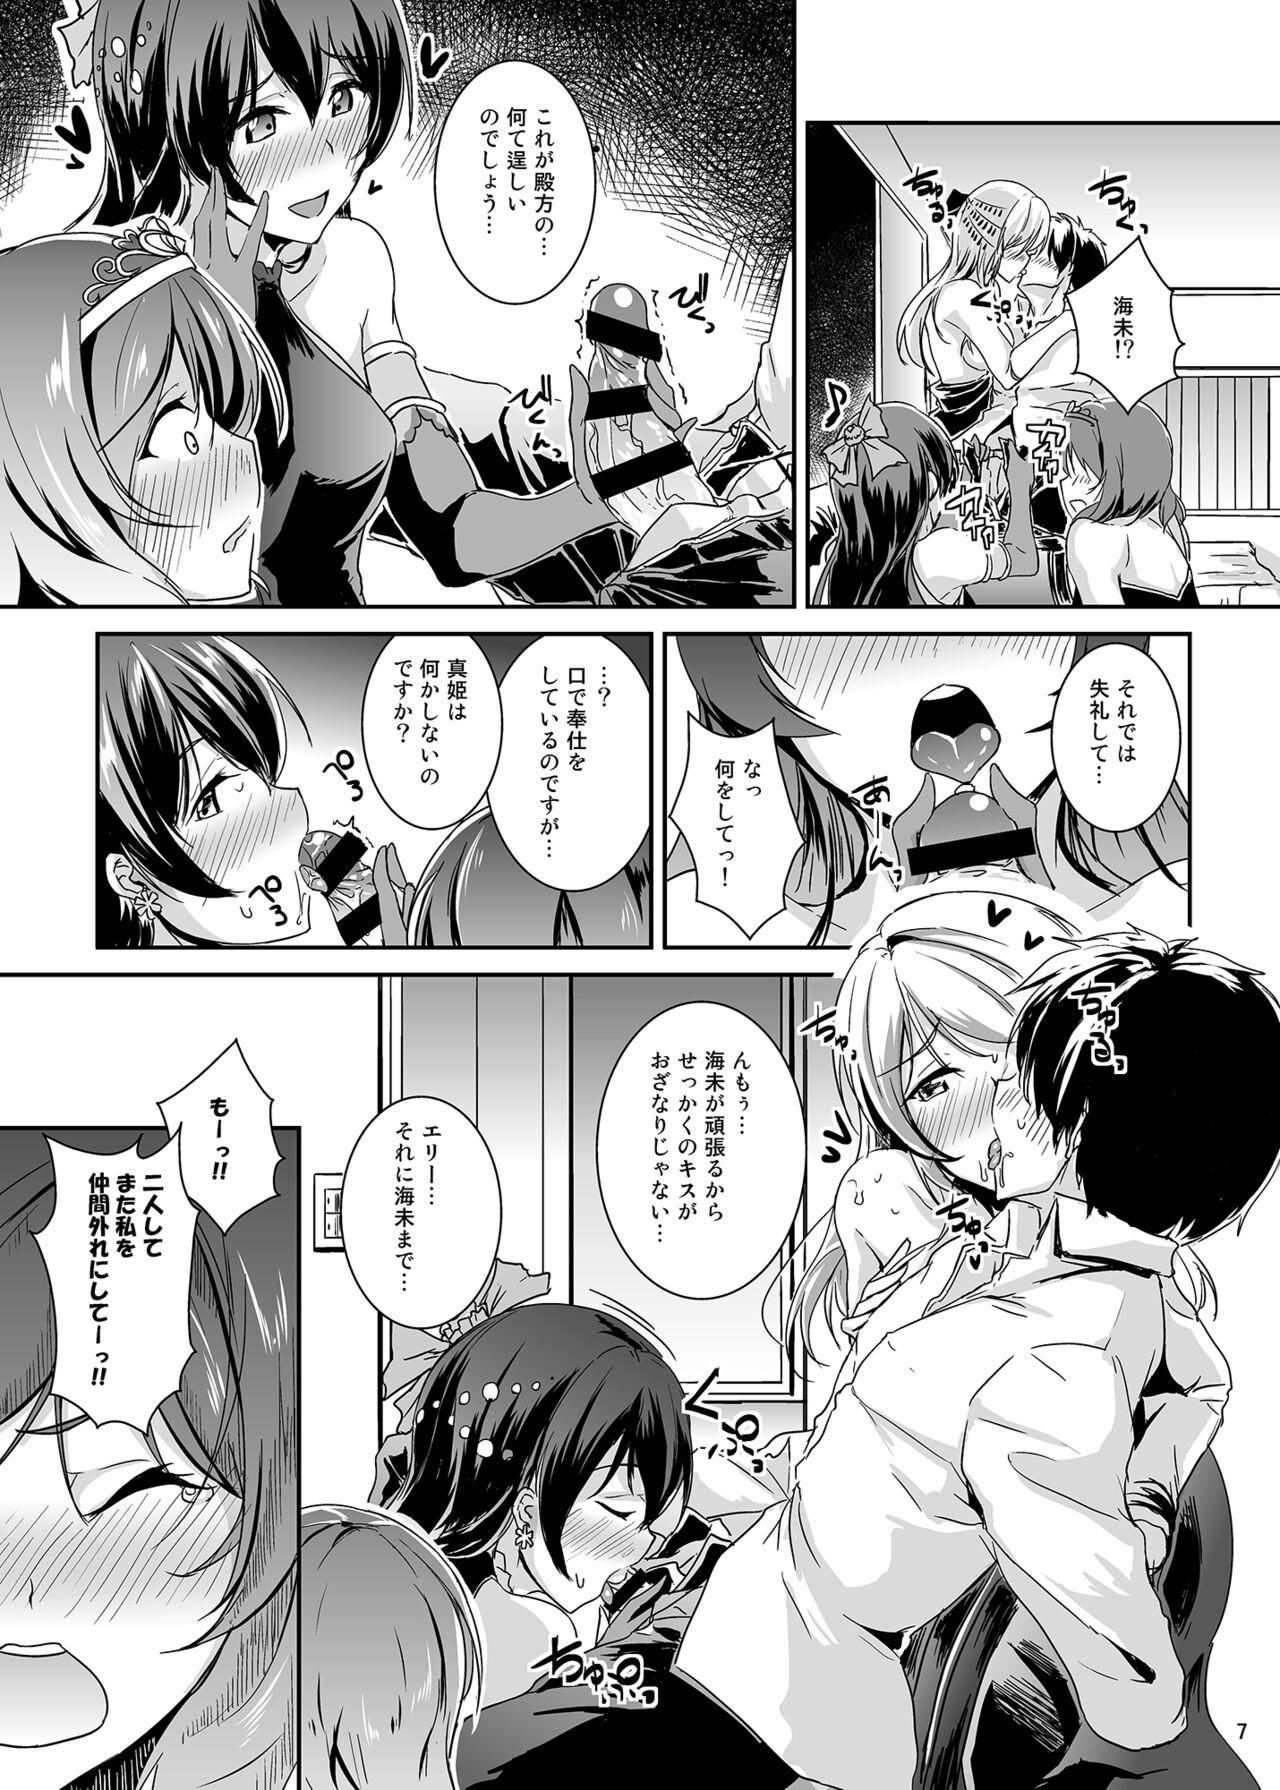 Actress secret in my heart - Love live Innocent - Page 7